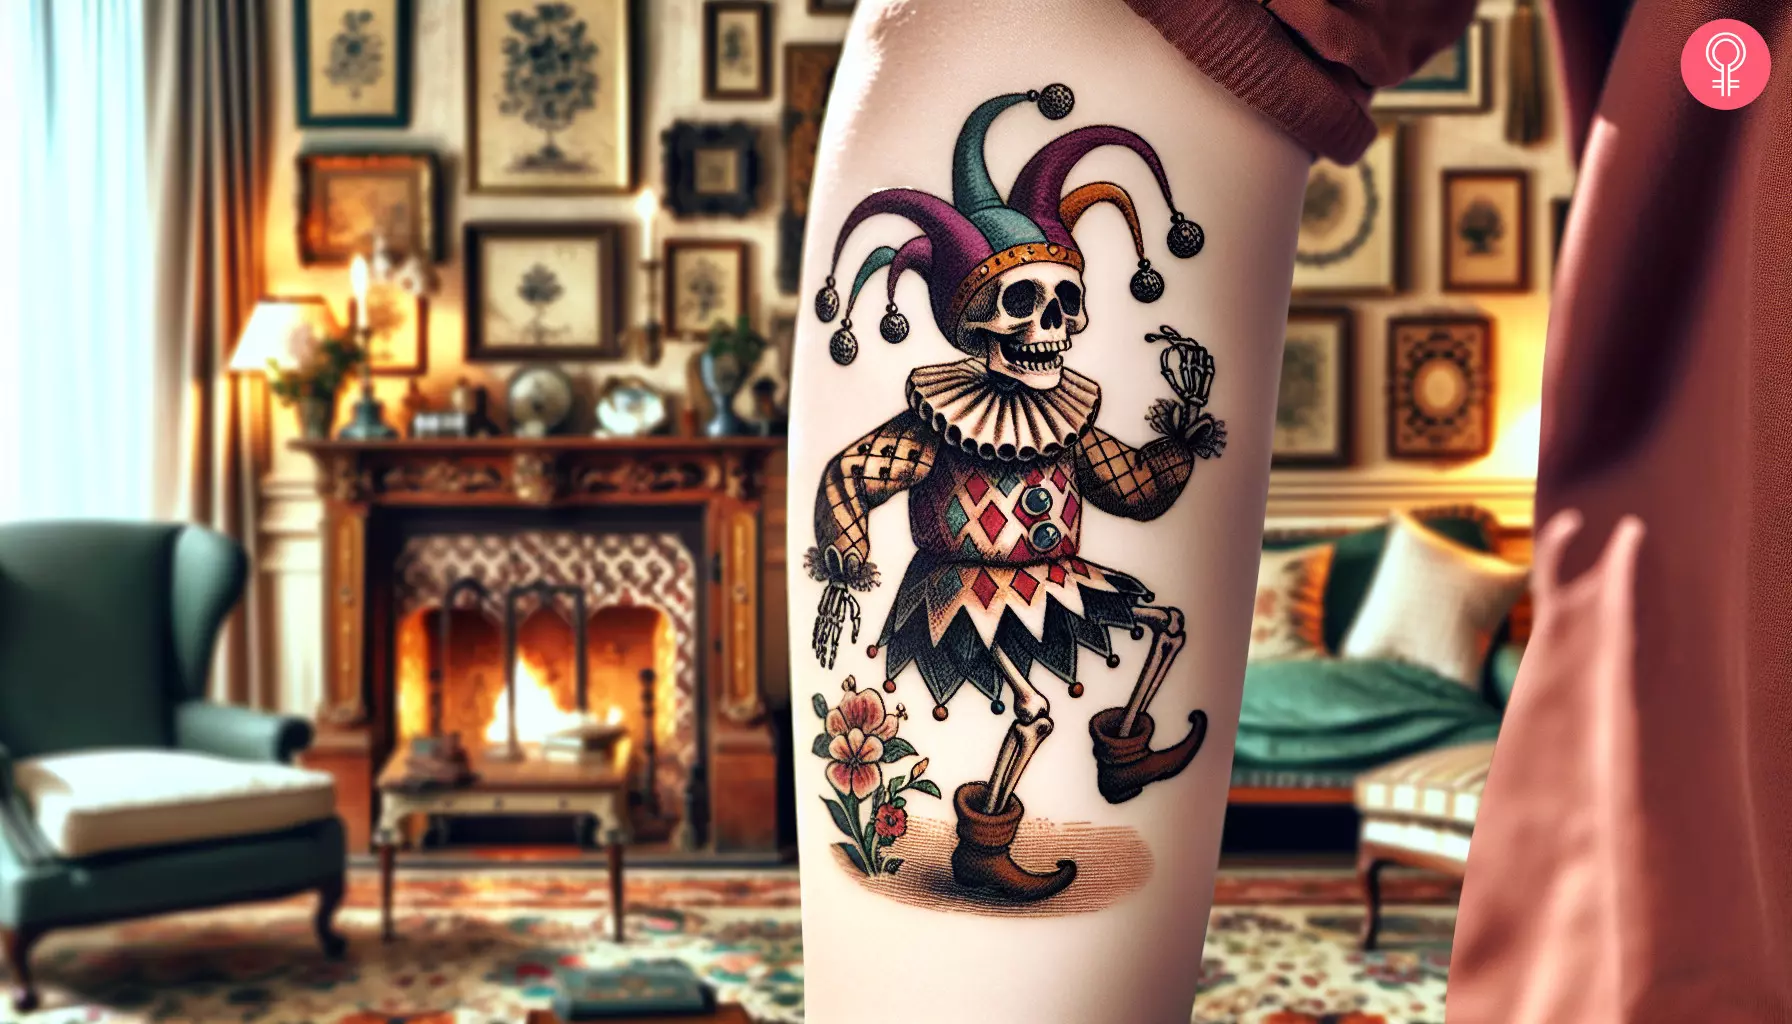 Skeleton jester tattoo on the forearm of a woman